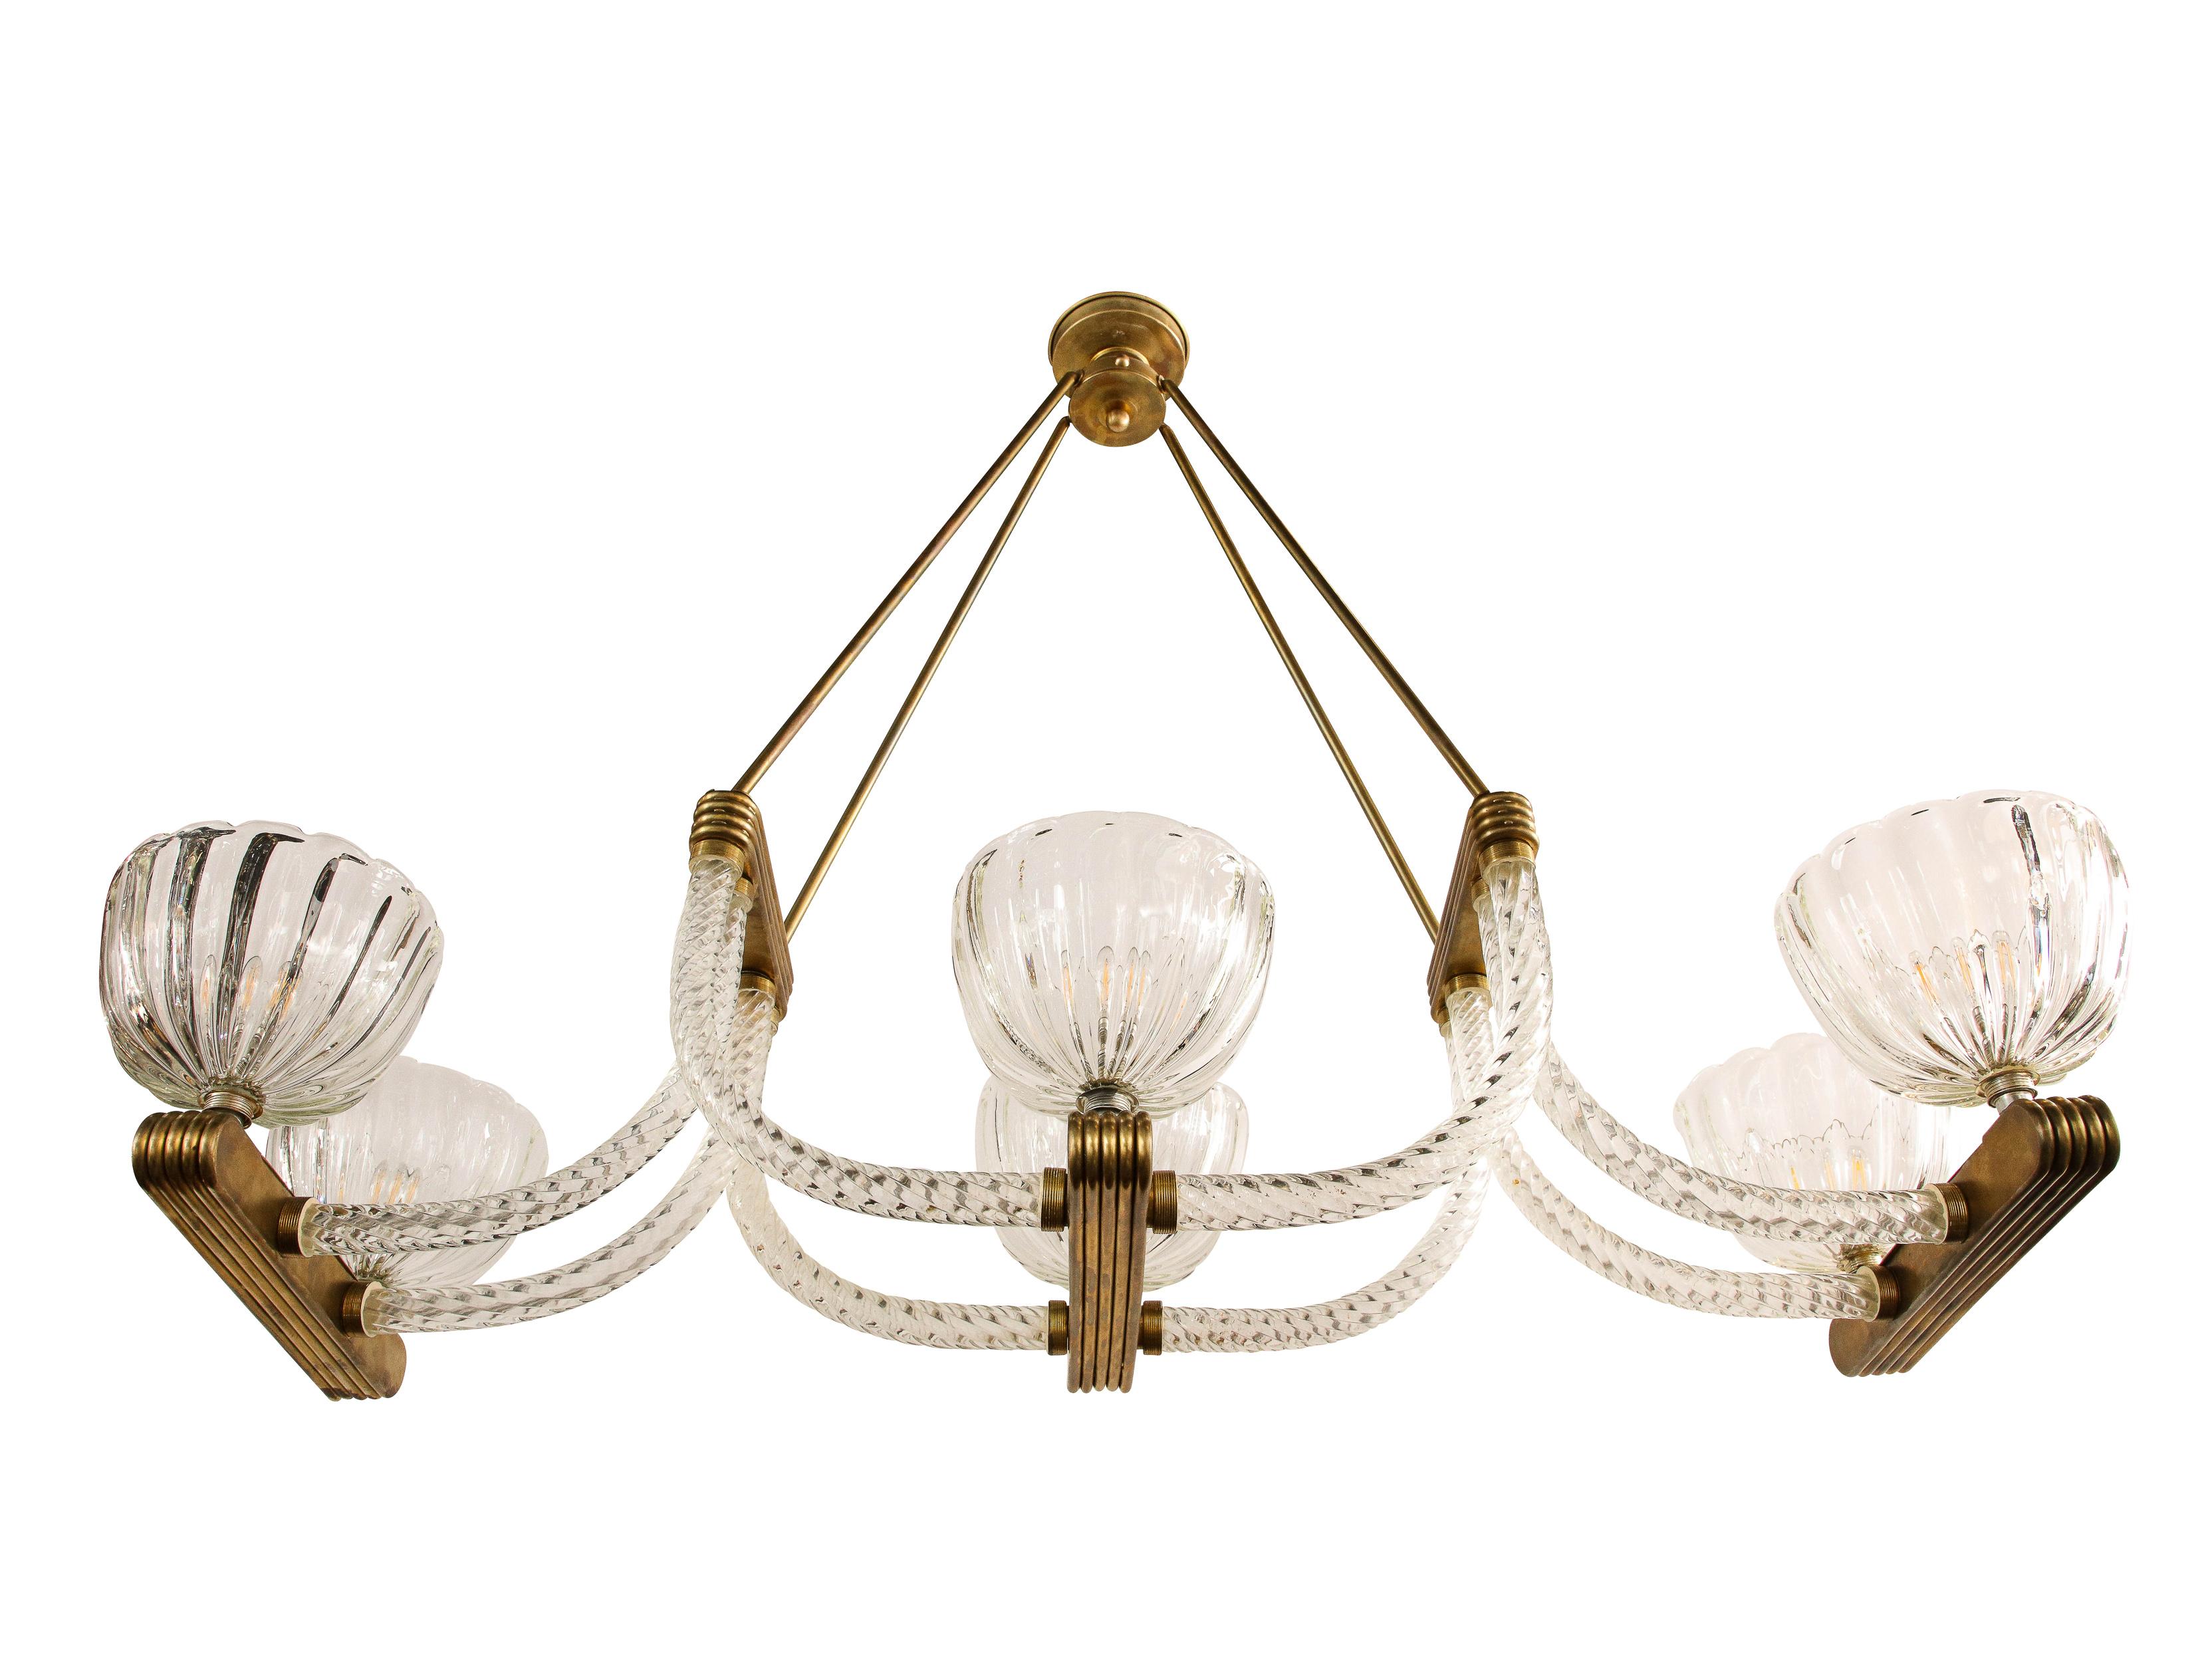 This magnificent Art Deco chandelier was realized by the legendary workshop of Ercole Barovier in Murano- the island off the coast of Venice renowned for centuries for its superlative craftsmanship- circa 1940. It features six billowing sculptural